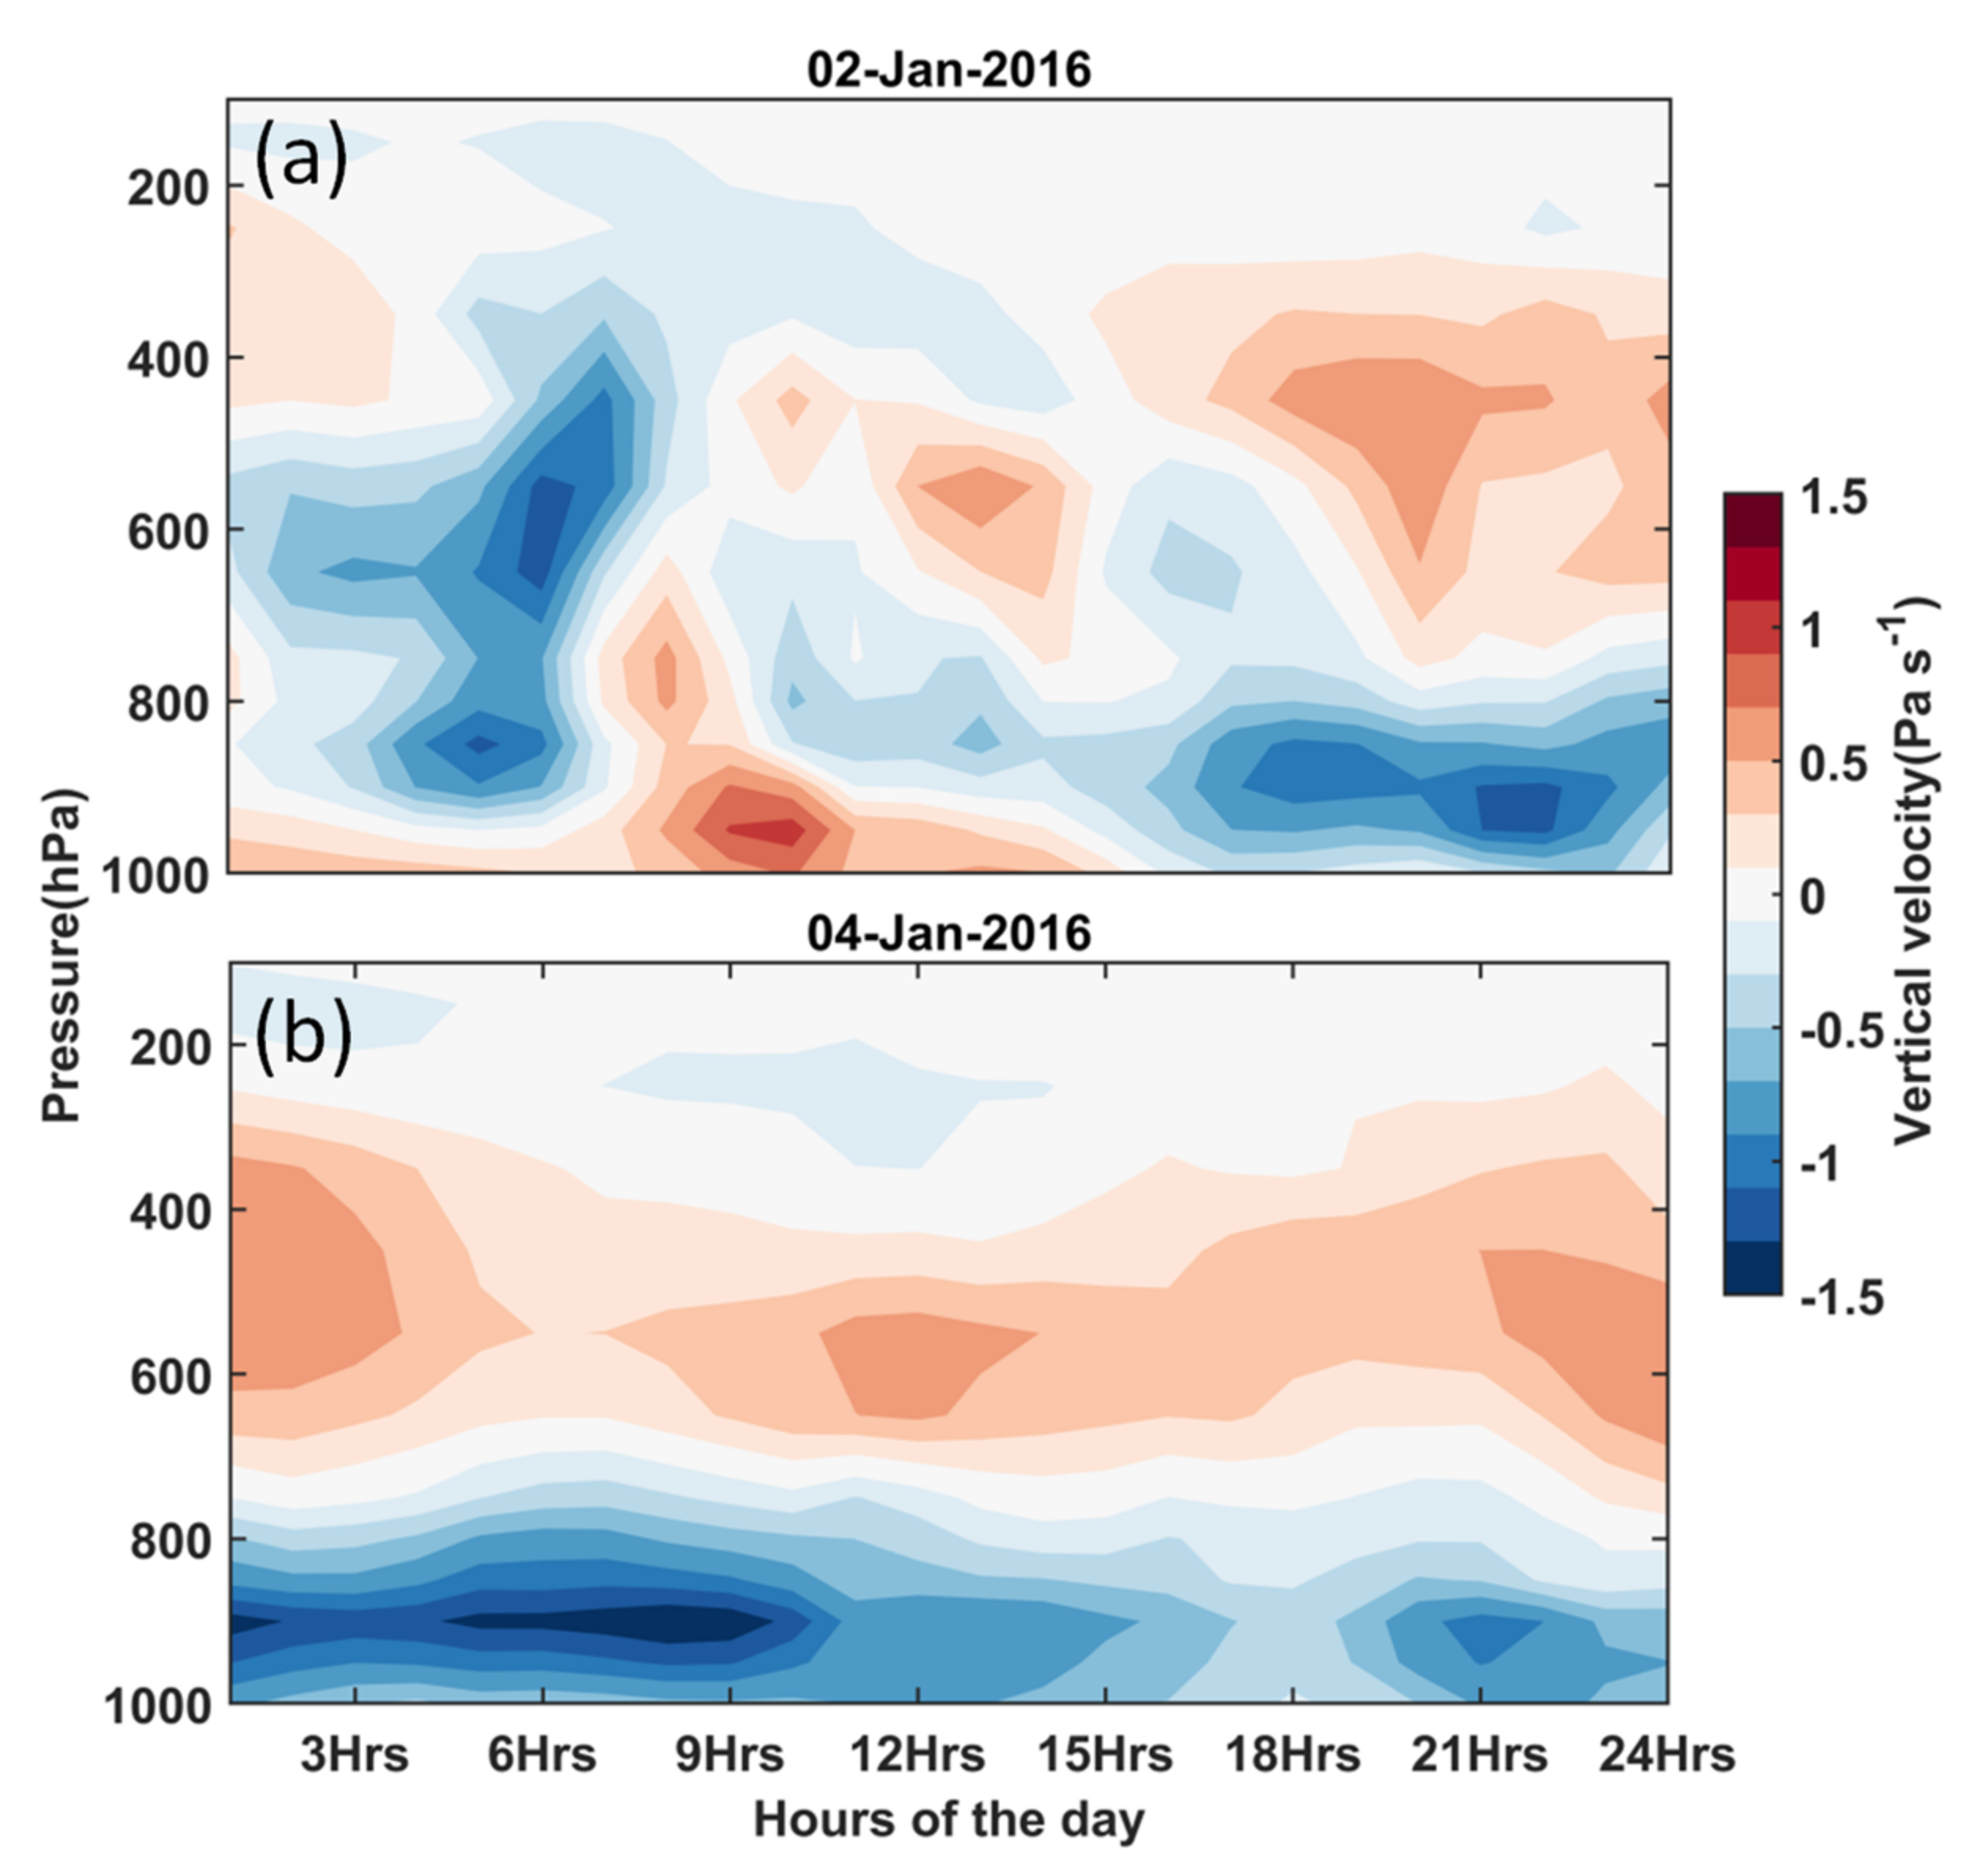 Area averaged cloud base heights (CBH) and maximum cloud top heights